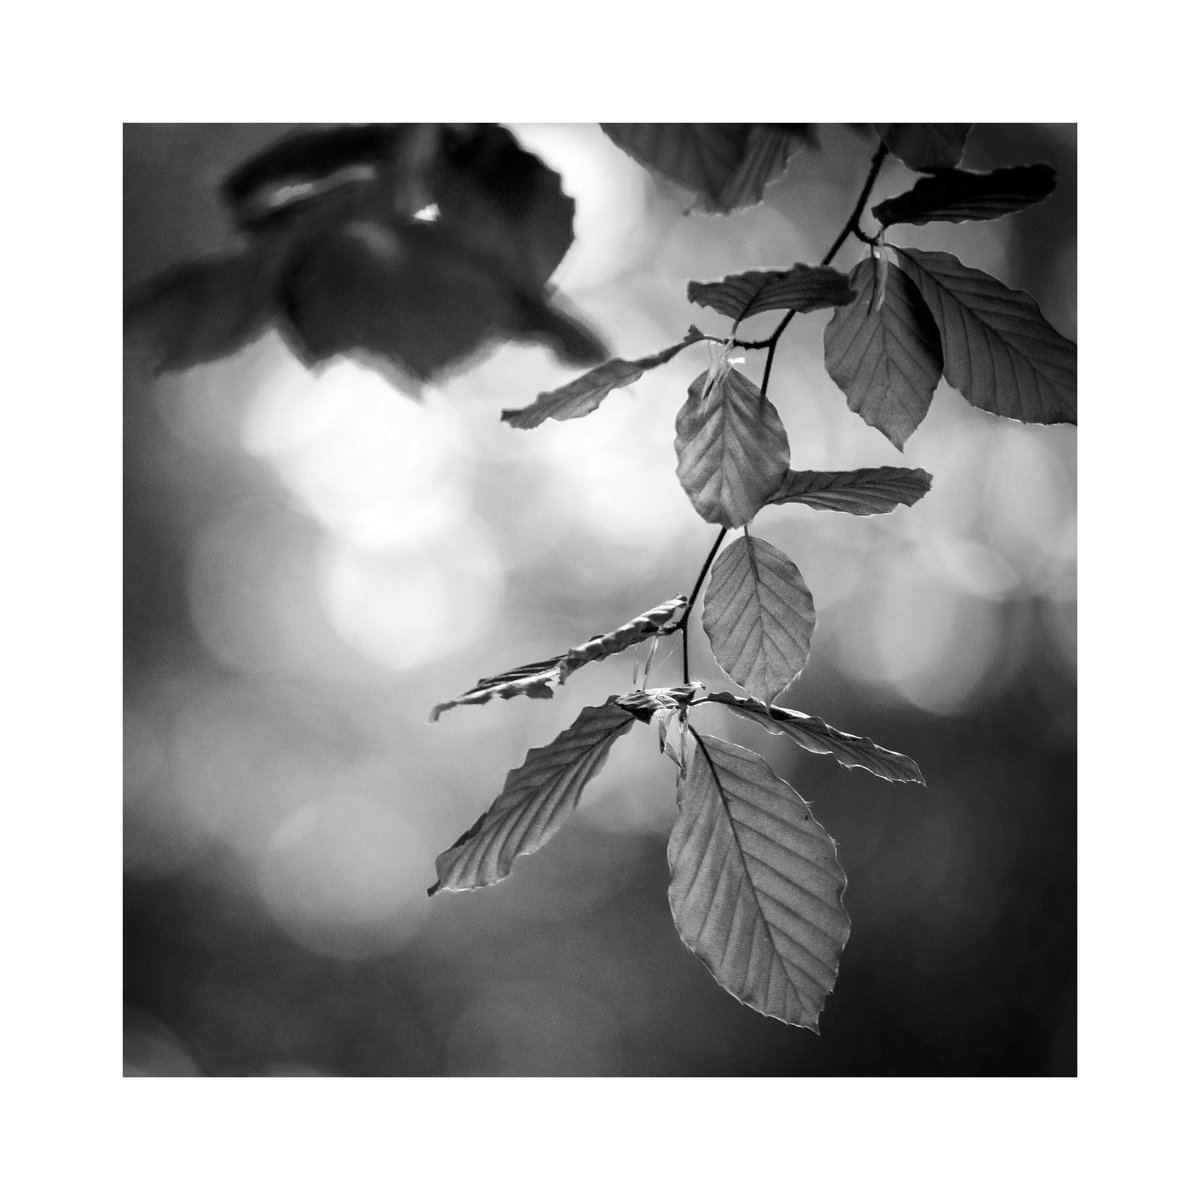 Beech Leaves, Oxfordshire.
#photography #monochrome #bnw